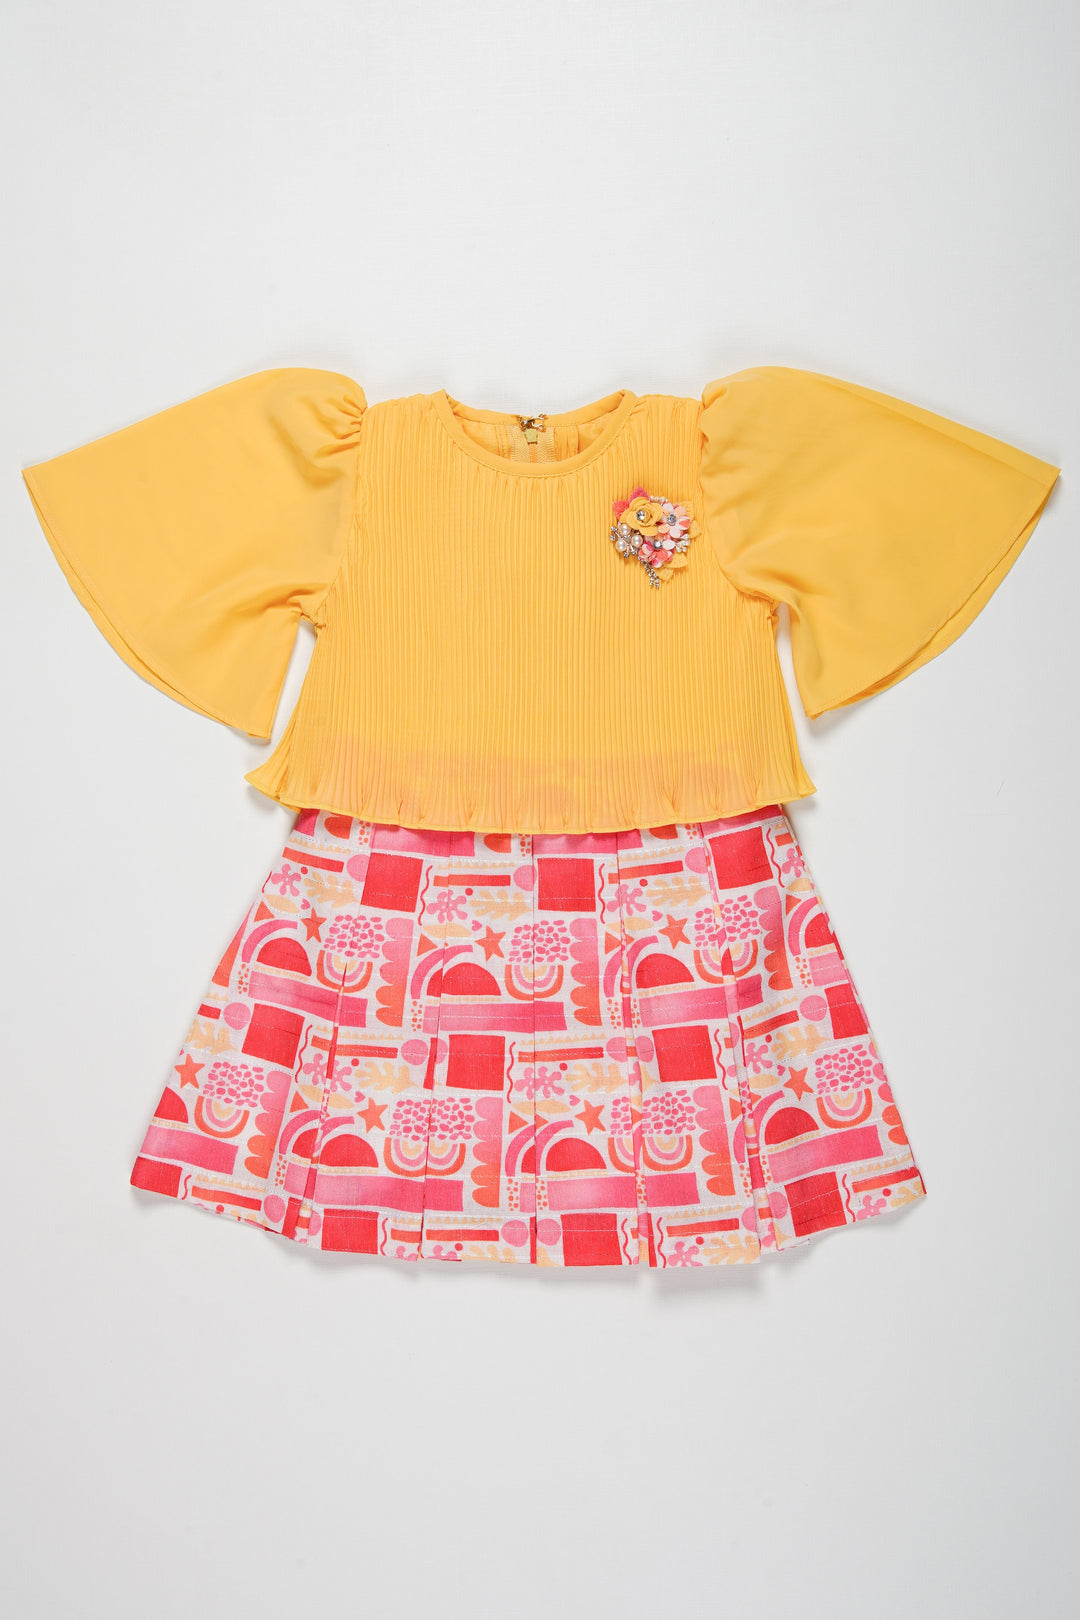 The Nesavu Girls Fancy Frock Stylish Playtime Cotton Frock for Girls - Bright Yellow and Pink Nesavu 18 (2Y) / Yellow / Cotton GFC1324A-18 Discover Elegant New Cotton Frocks for Girls | Soft and Fancy Designs Available | The Nesavu